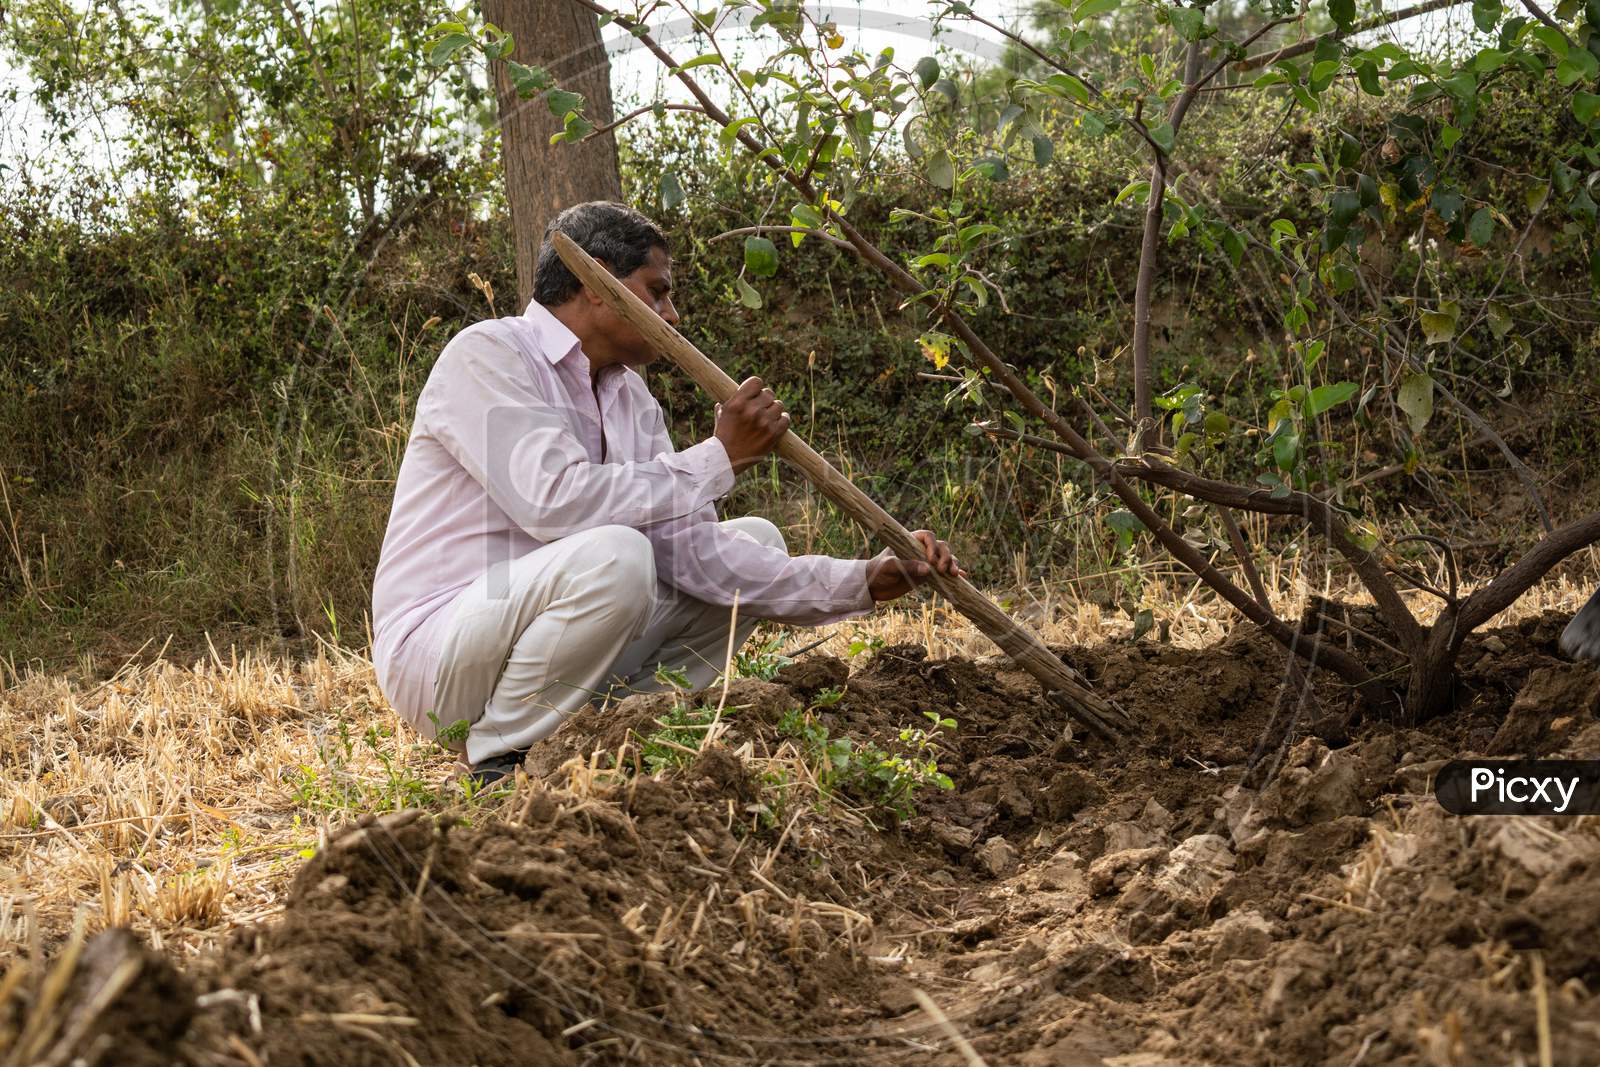 Preparation of pits around plum trees for watering and hoeing or gudai around the trees by farmer using shovel